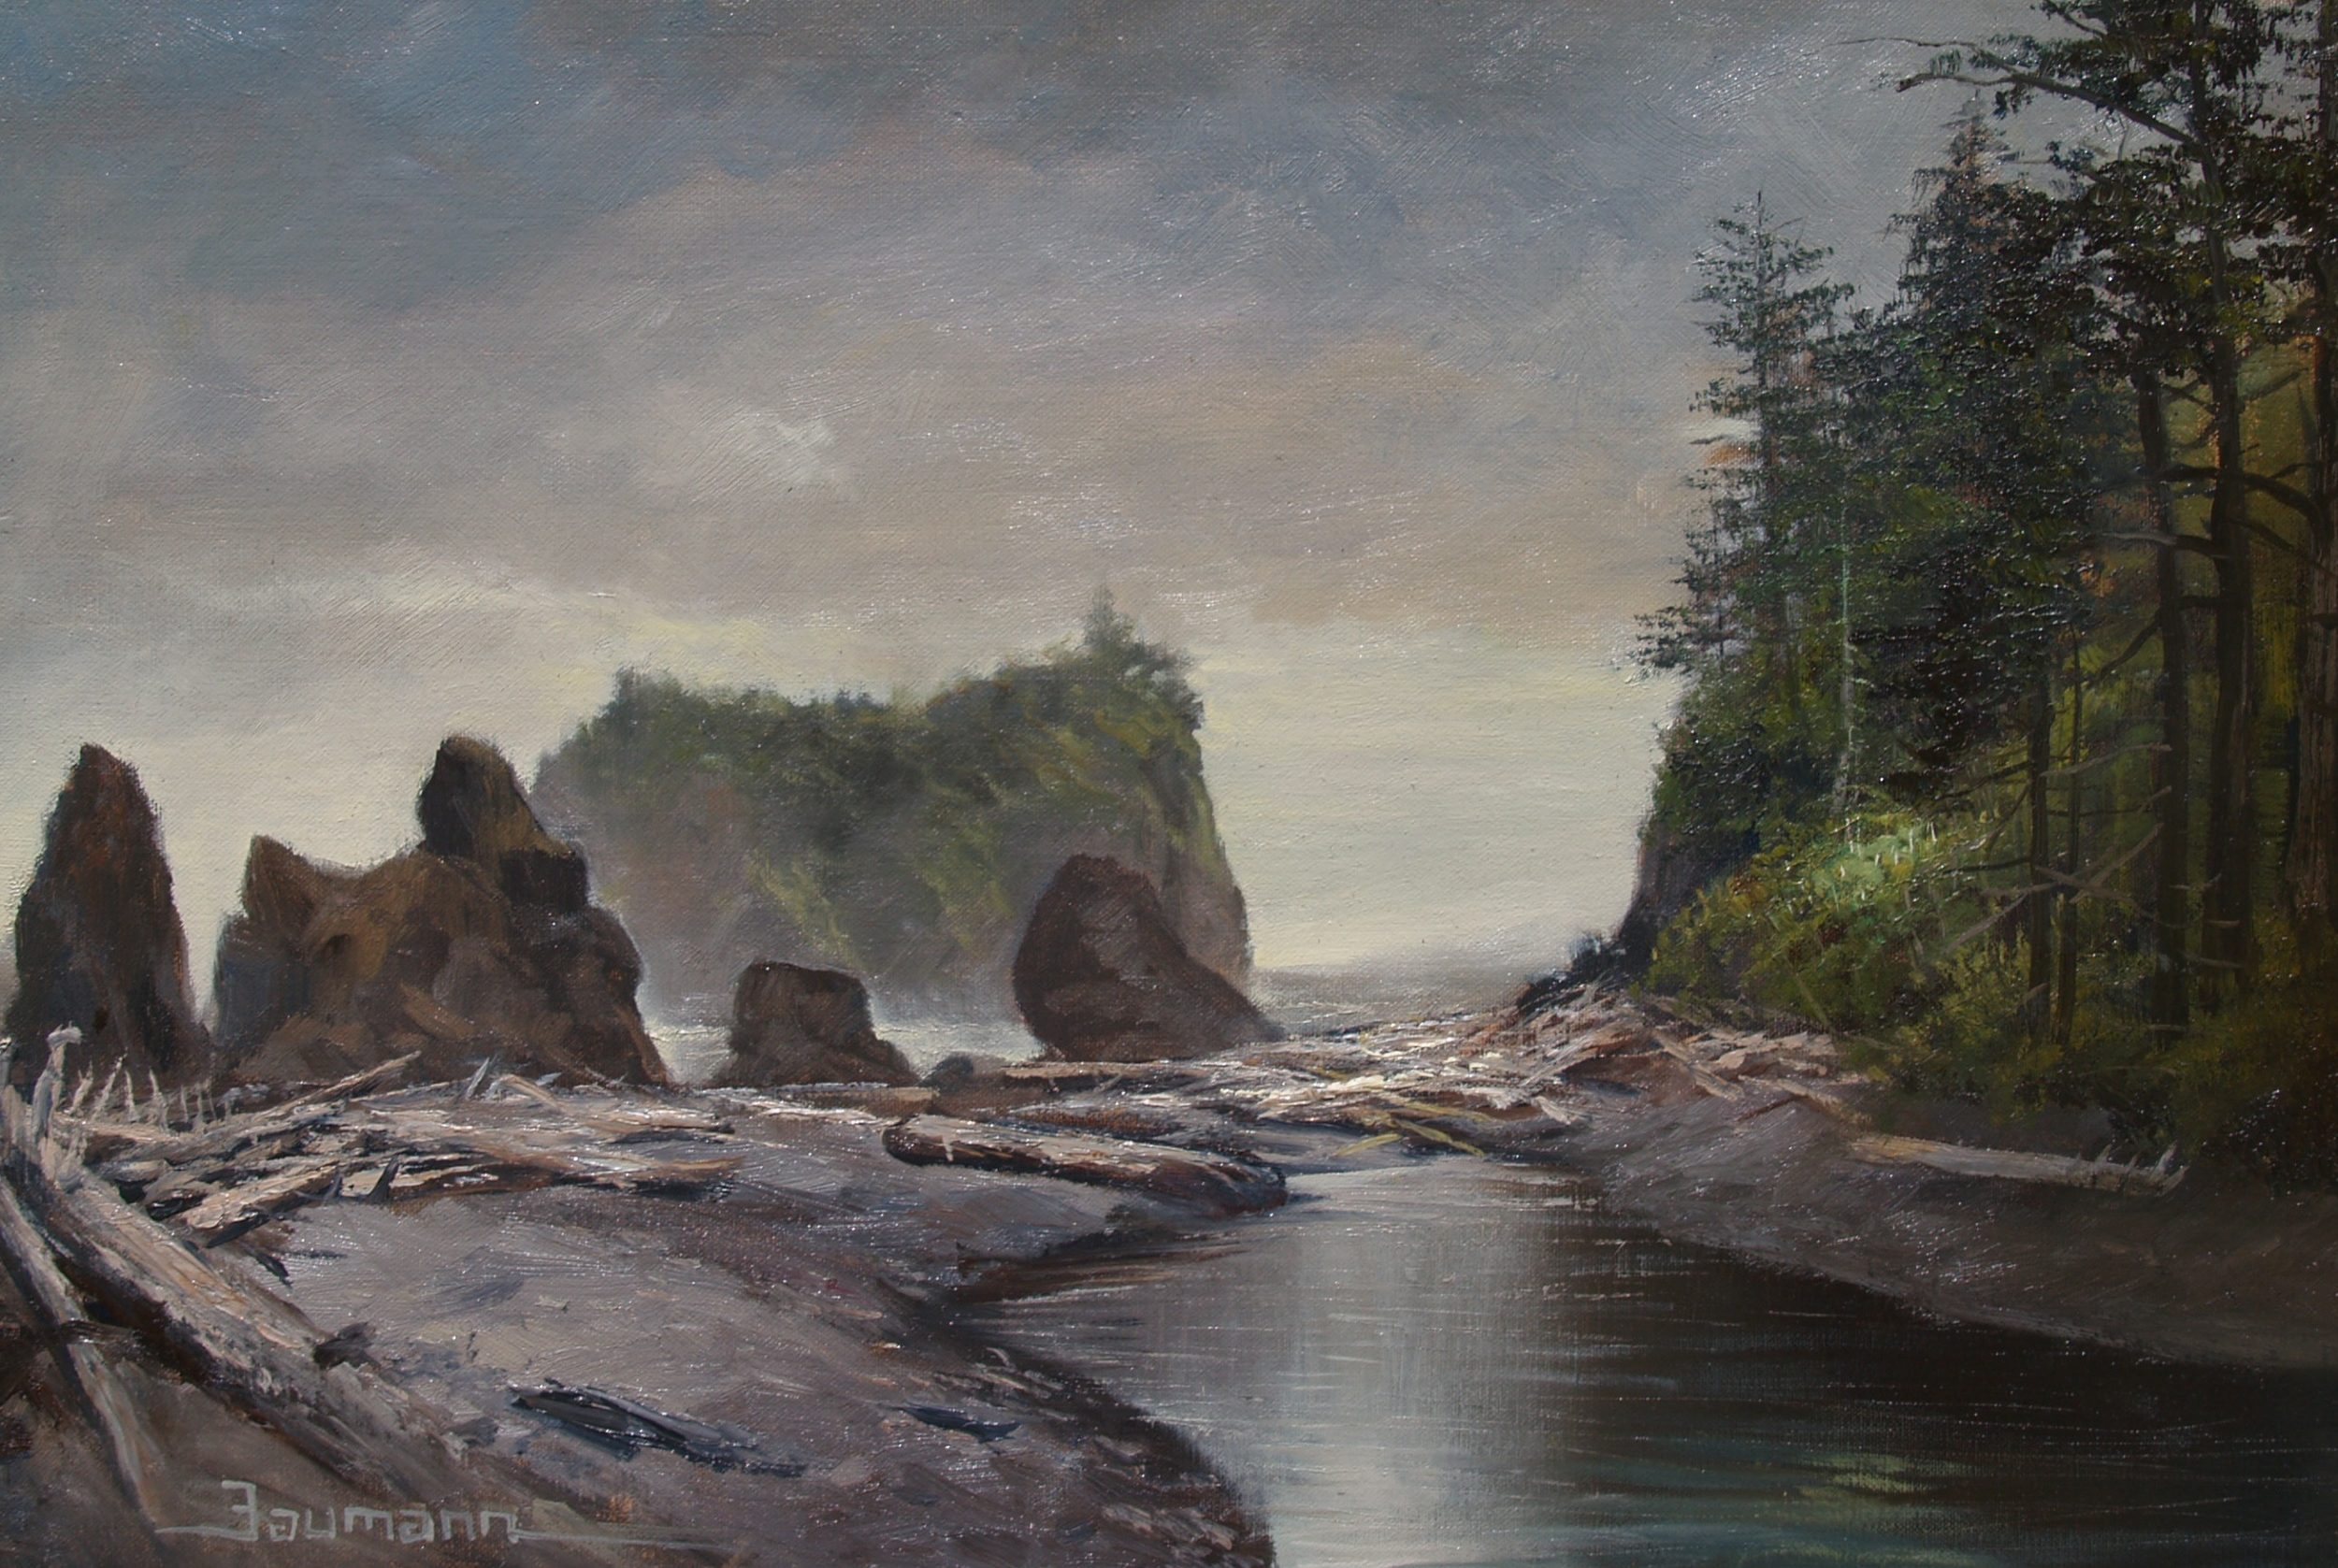 This is a painting of a foggy morning coastline called Misty Morning in Olymplic National Park painted by Stefan Baumann with his focus on creating a misty morning scene using greyed warm and cool colors.